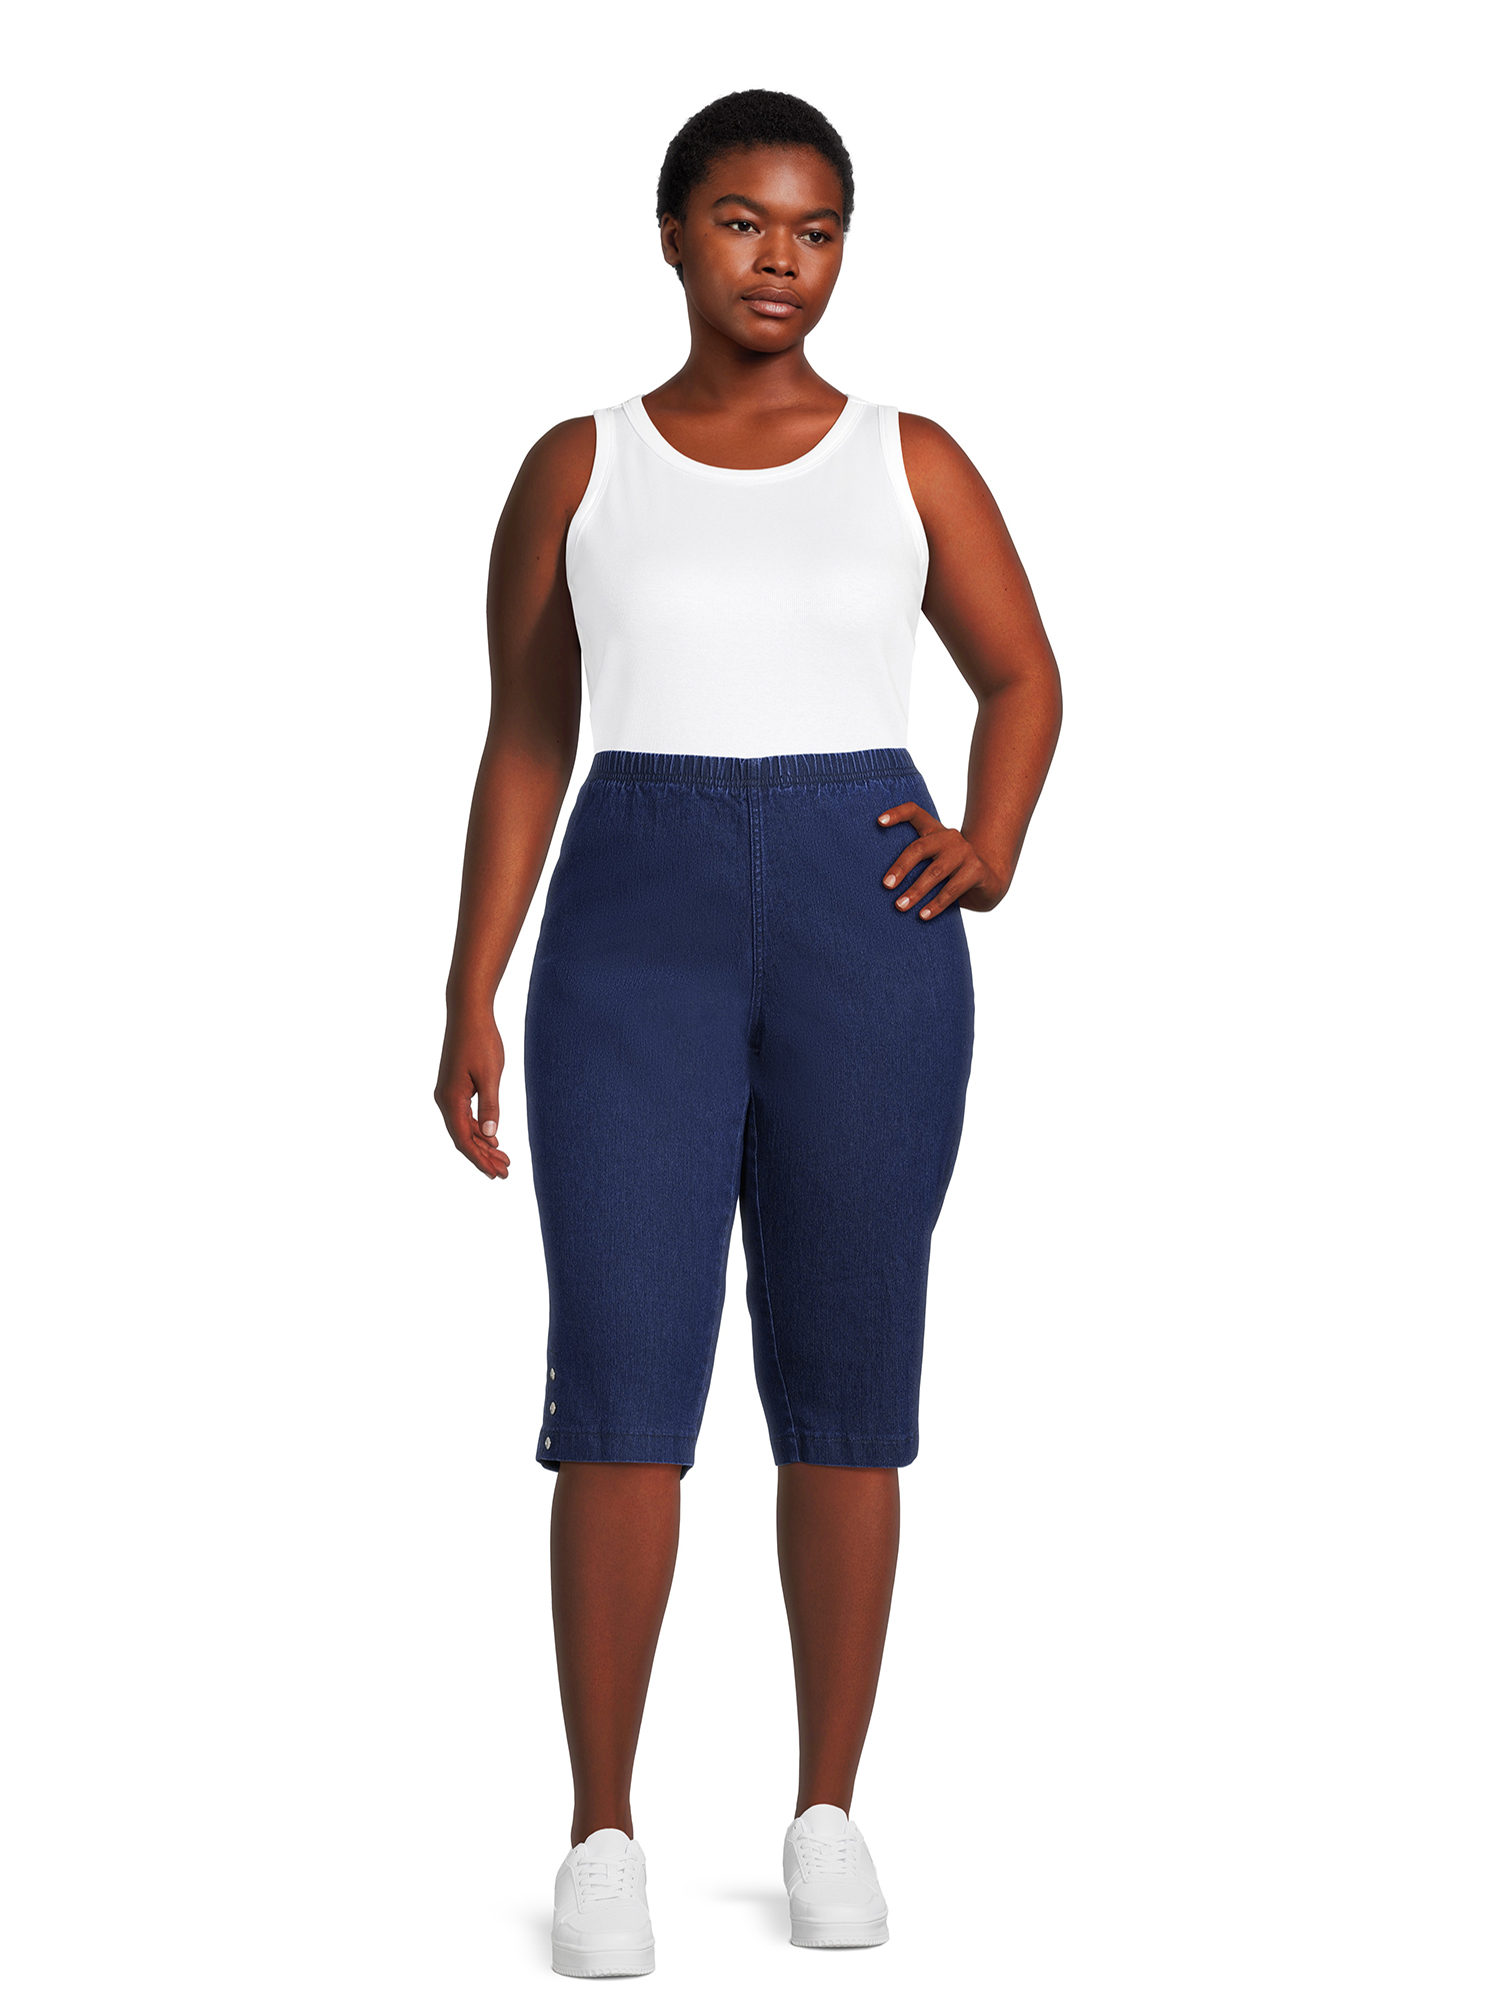 Just My Size Women's Plus Bling Tab Stretch Capri - image 4 of 6